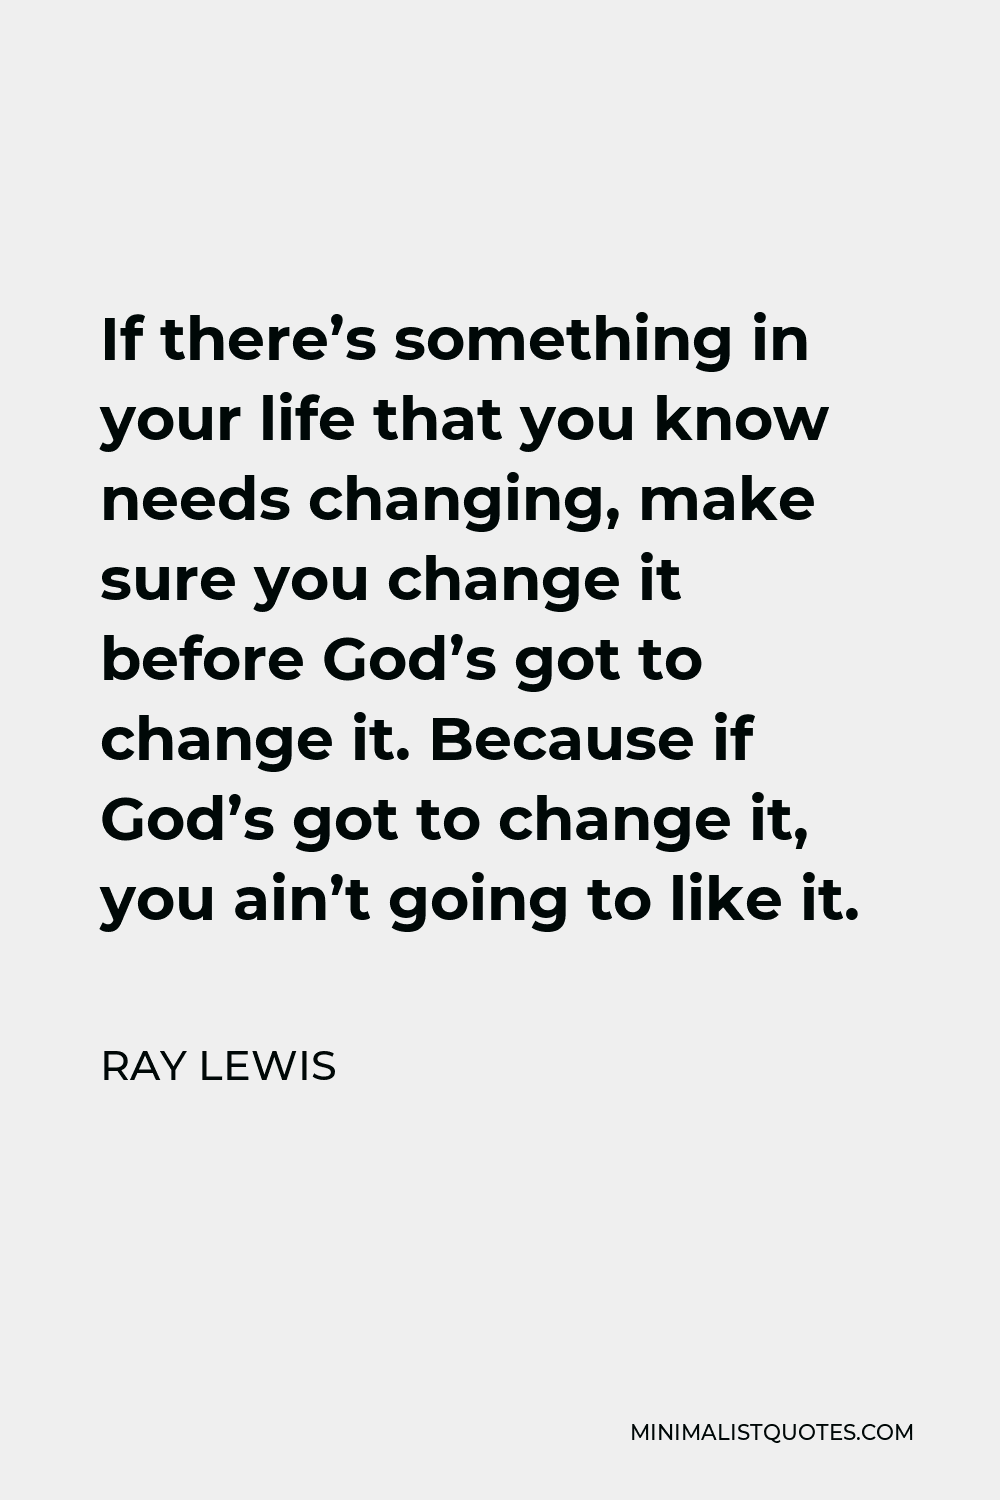 Ray Lewis Quote - If there’s something in your life that you know needs changing, make sure you change it before God’s got to change it. Because if God’s got to change it, you ain’t going to like it.